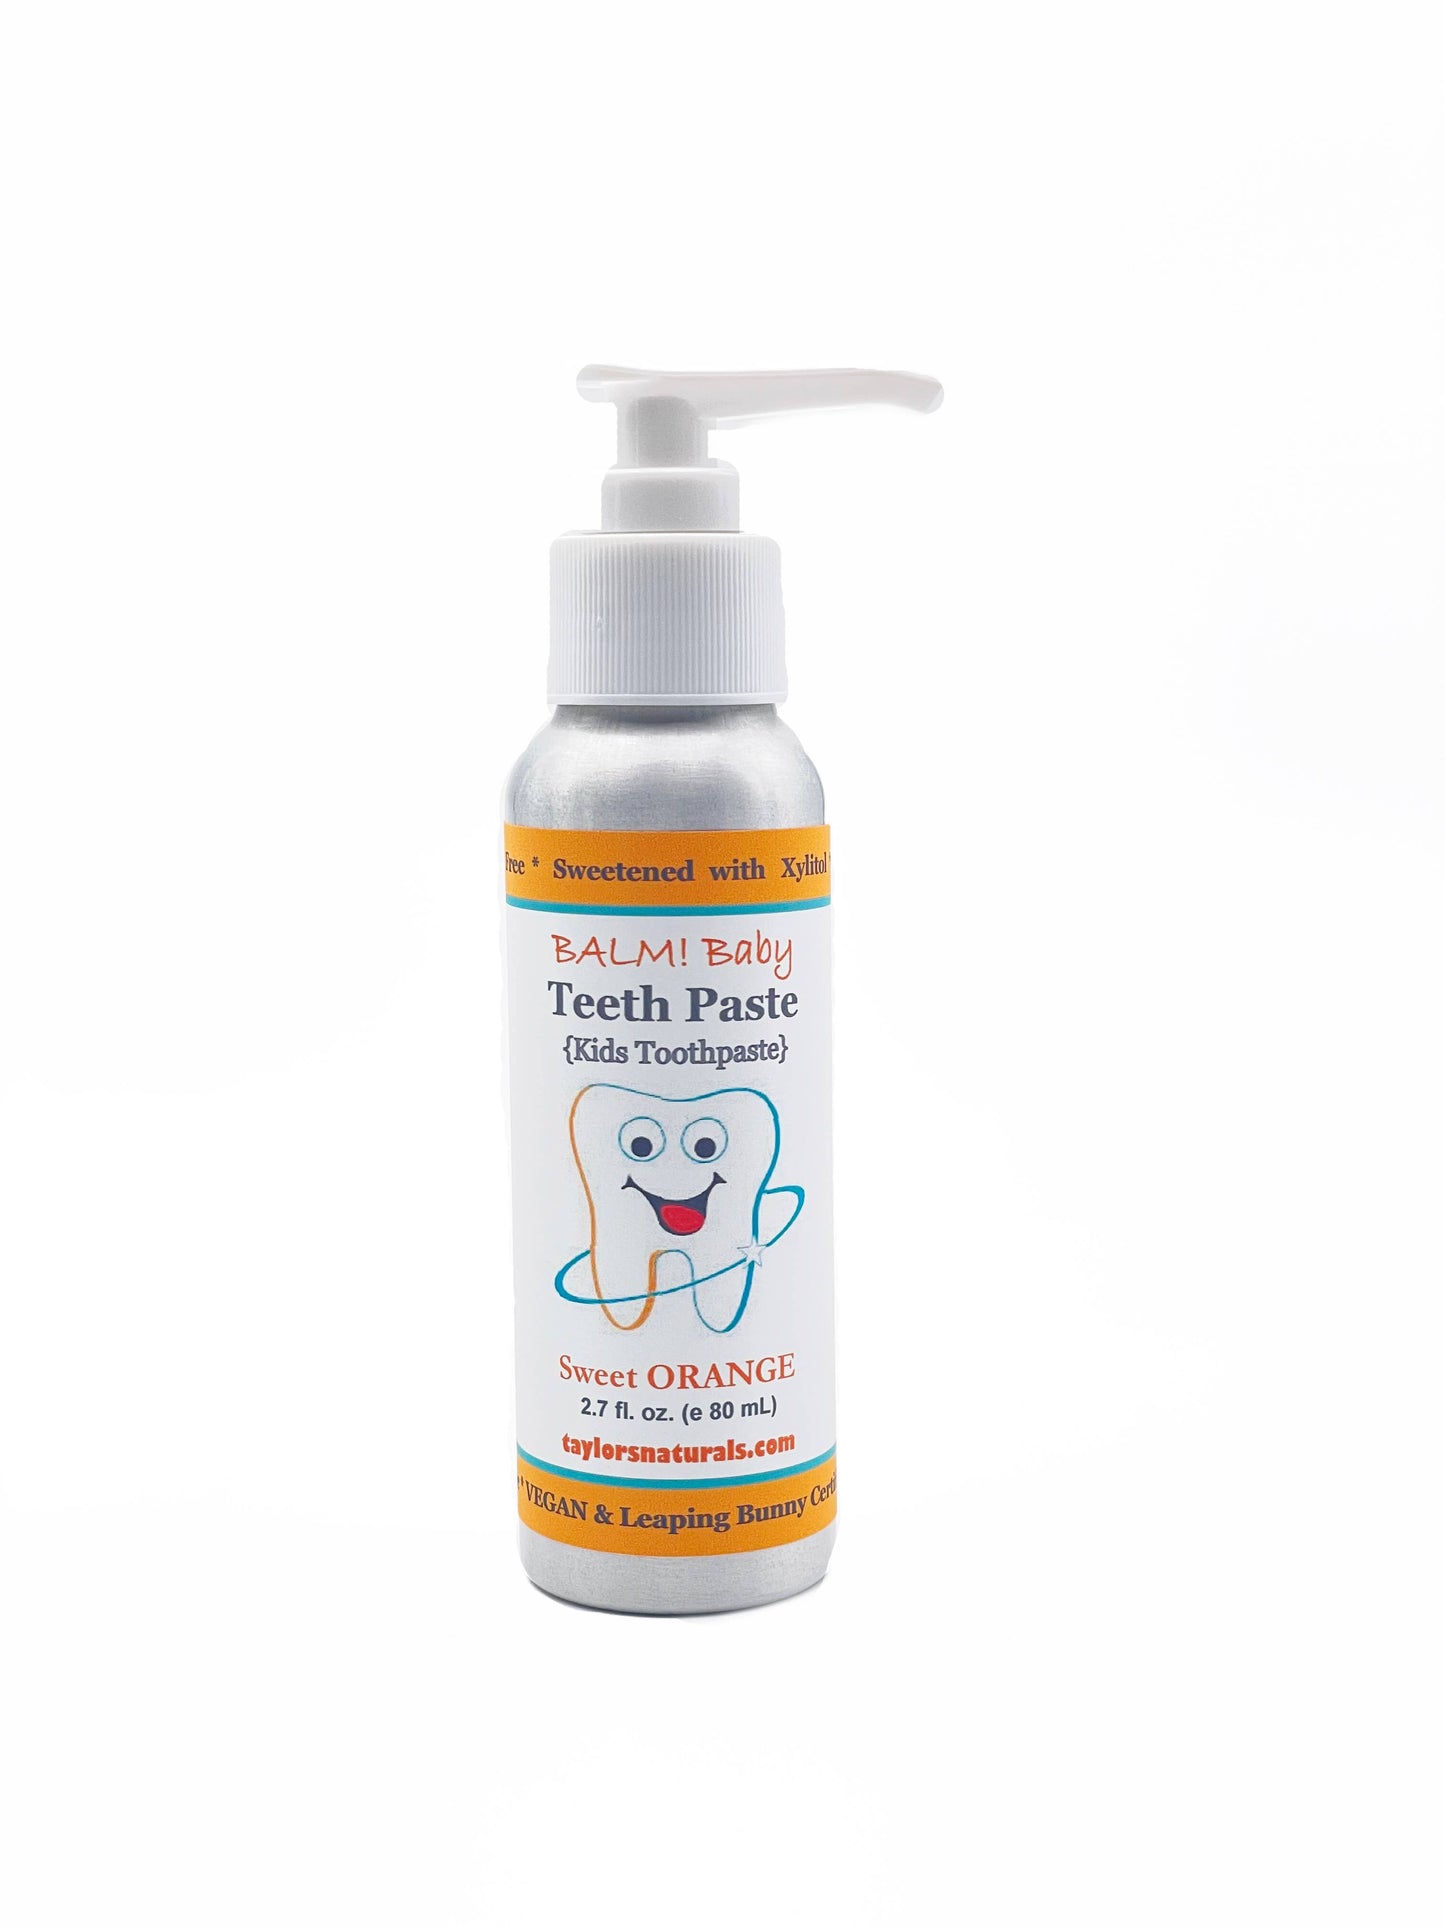 Taylor's Naturals - BALM! Baby - Teeth Paste Natural Kids Toothpaste